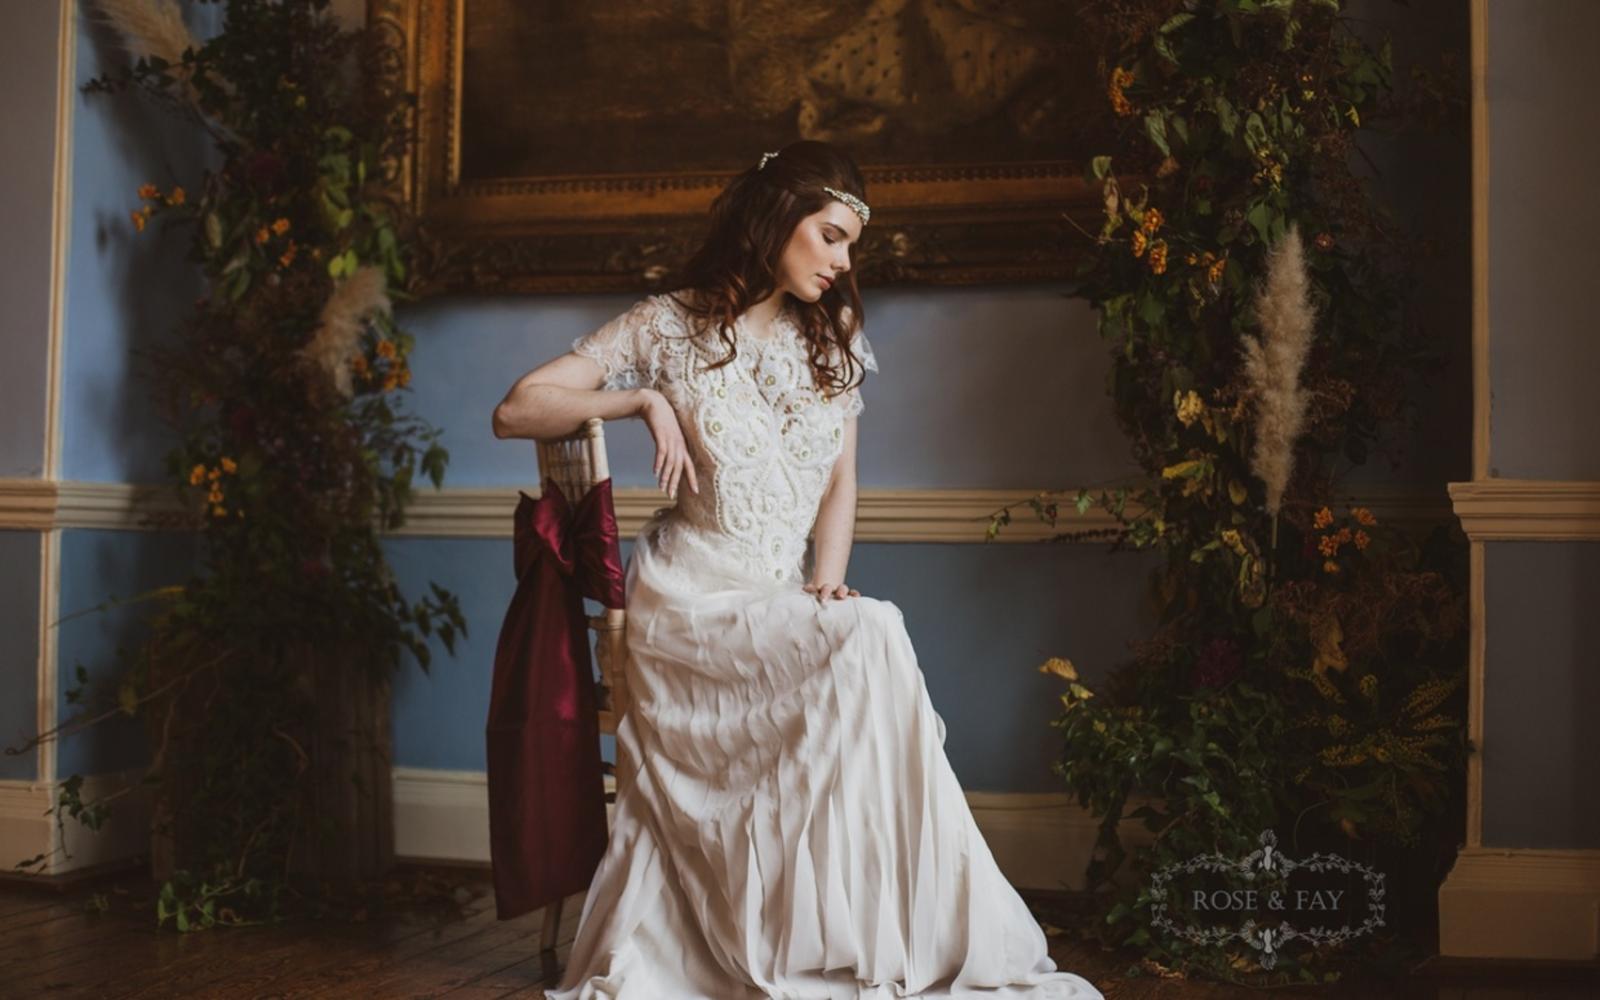 Styled Shot Avante Garde wedding venue Devizes Town Hall Whitewed Willoughby & Wolf Hibiscus & Hodge Pastel Designs classical whimsical autumnal rich flowing boho dress headband